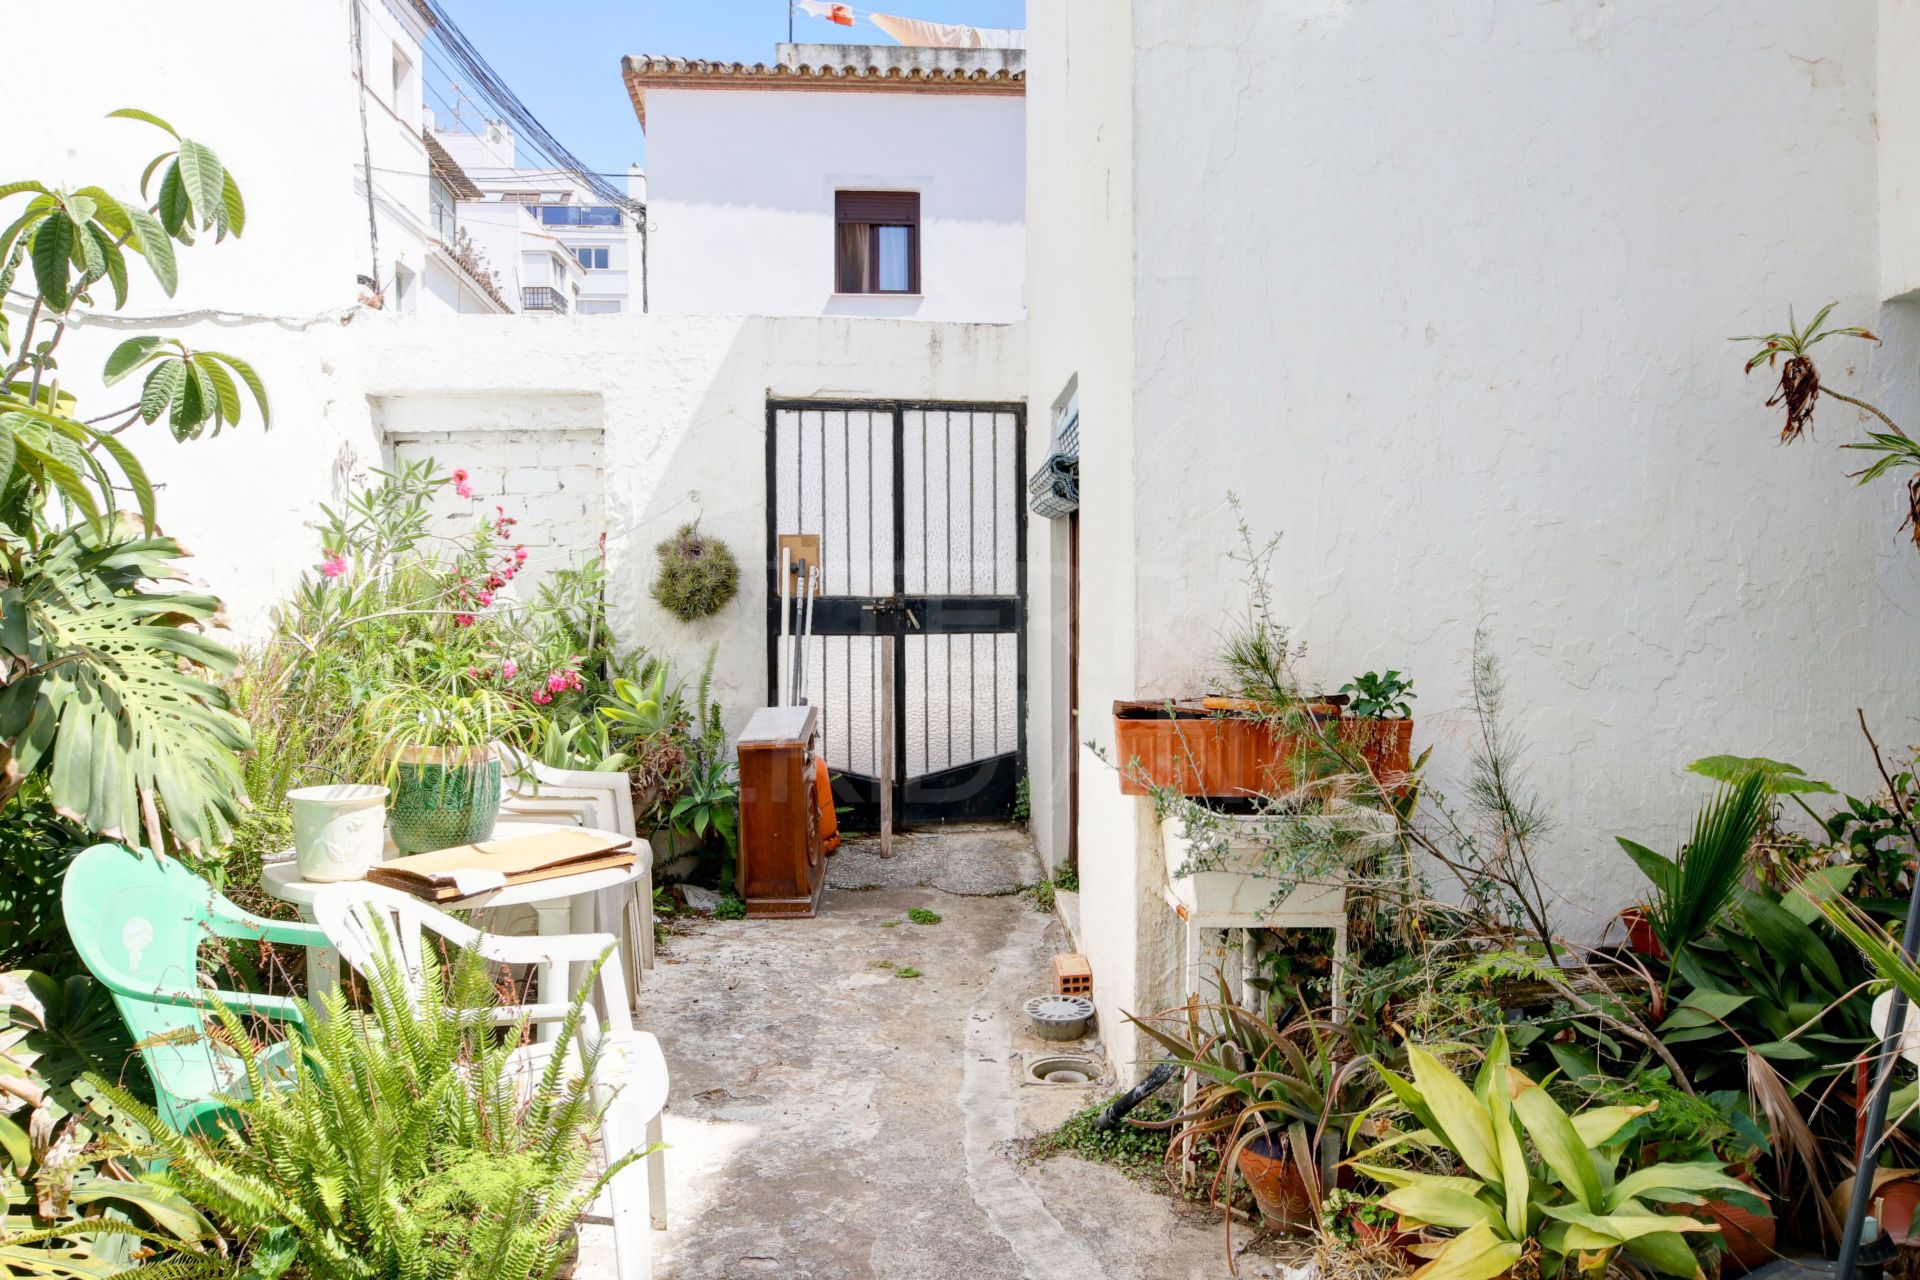 Charming townhouse to refurbish for sale in Estepona old town centre, 200 meters from the beach